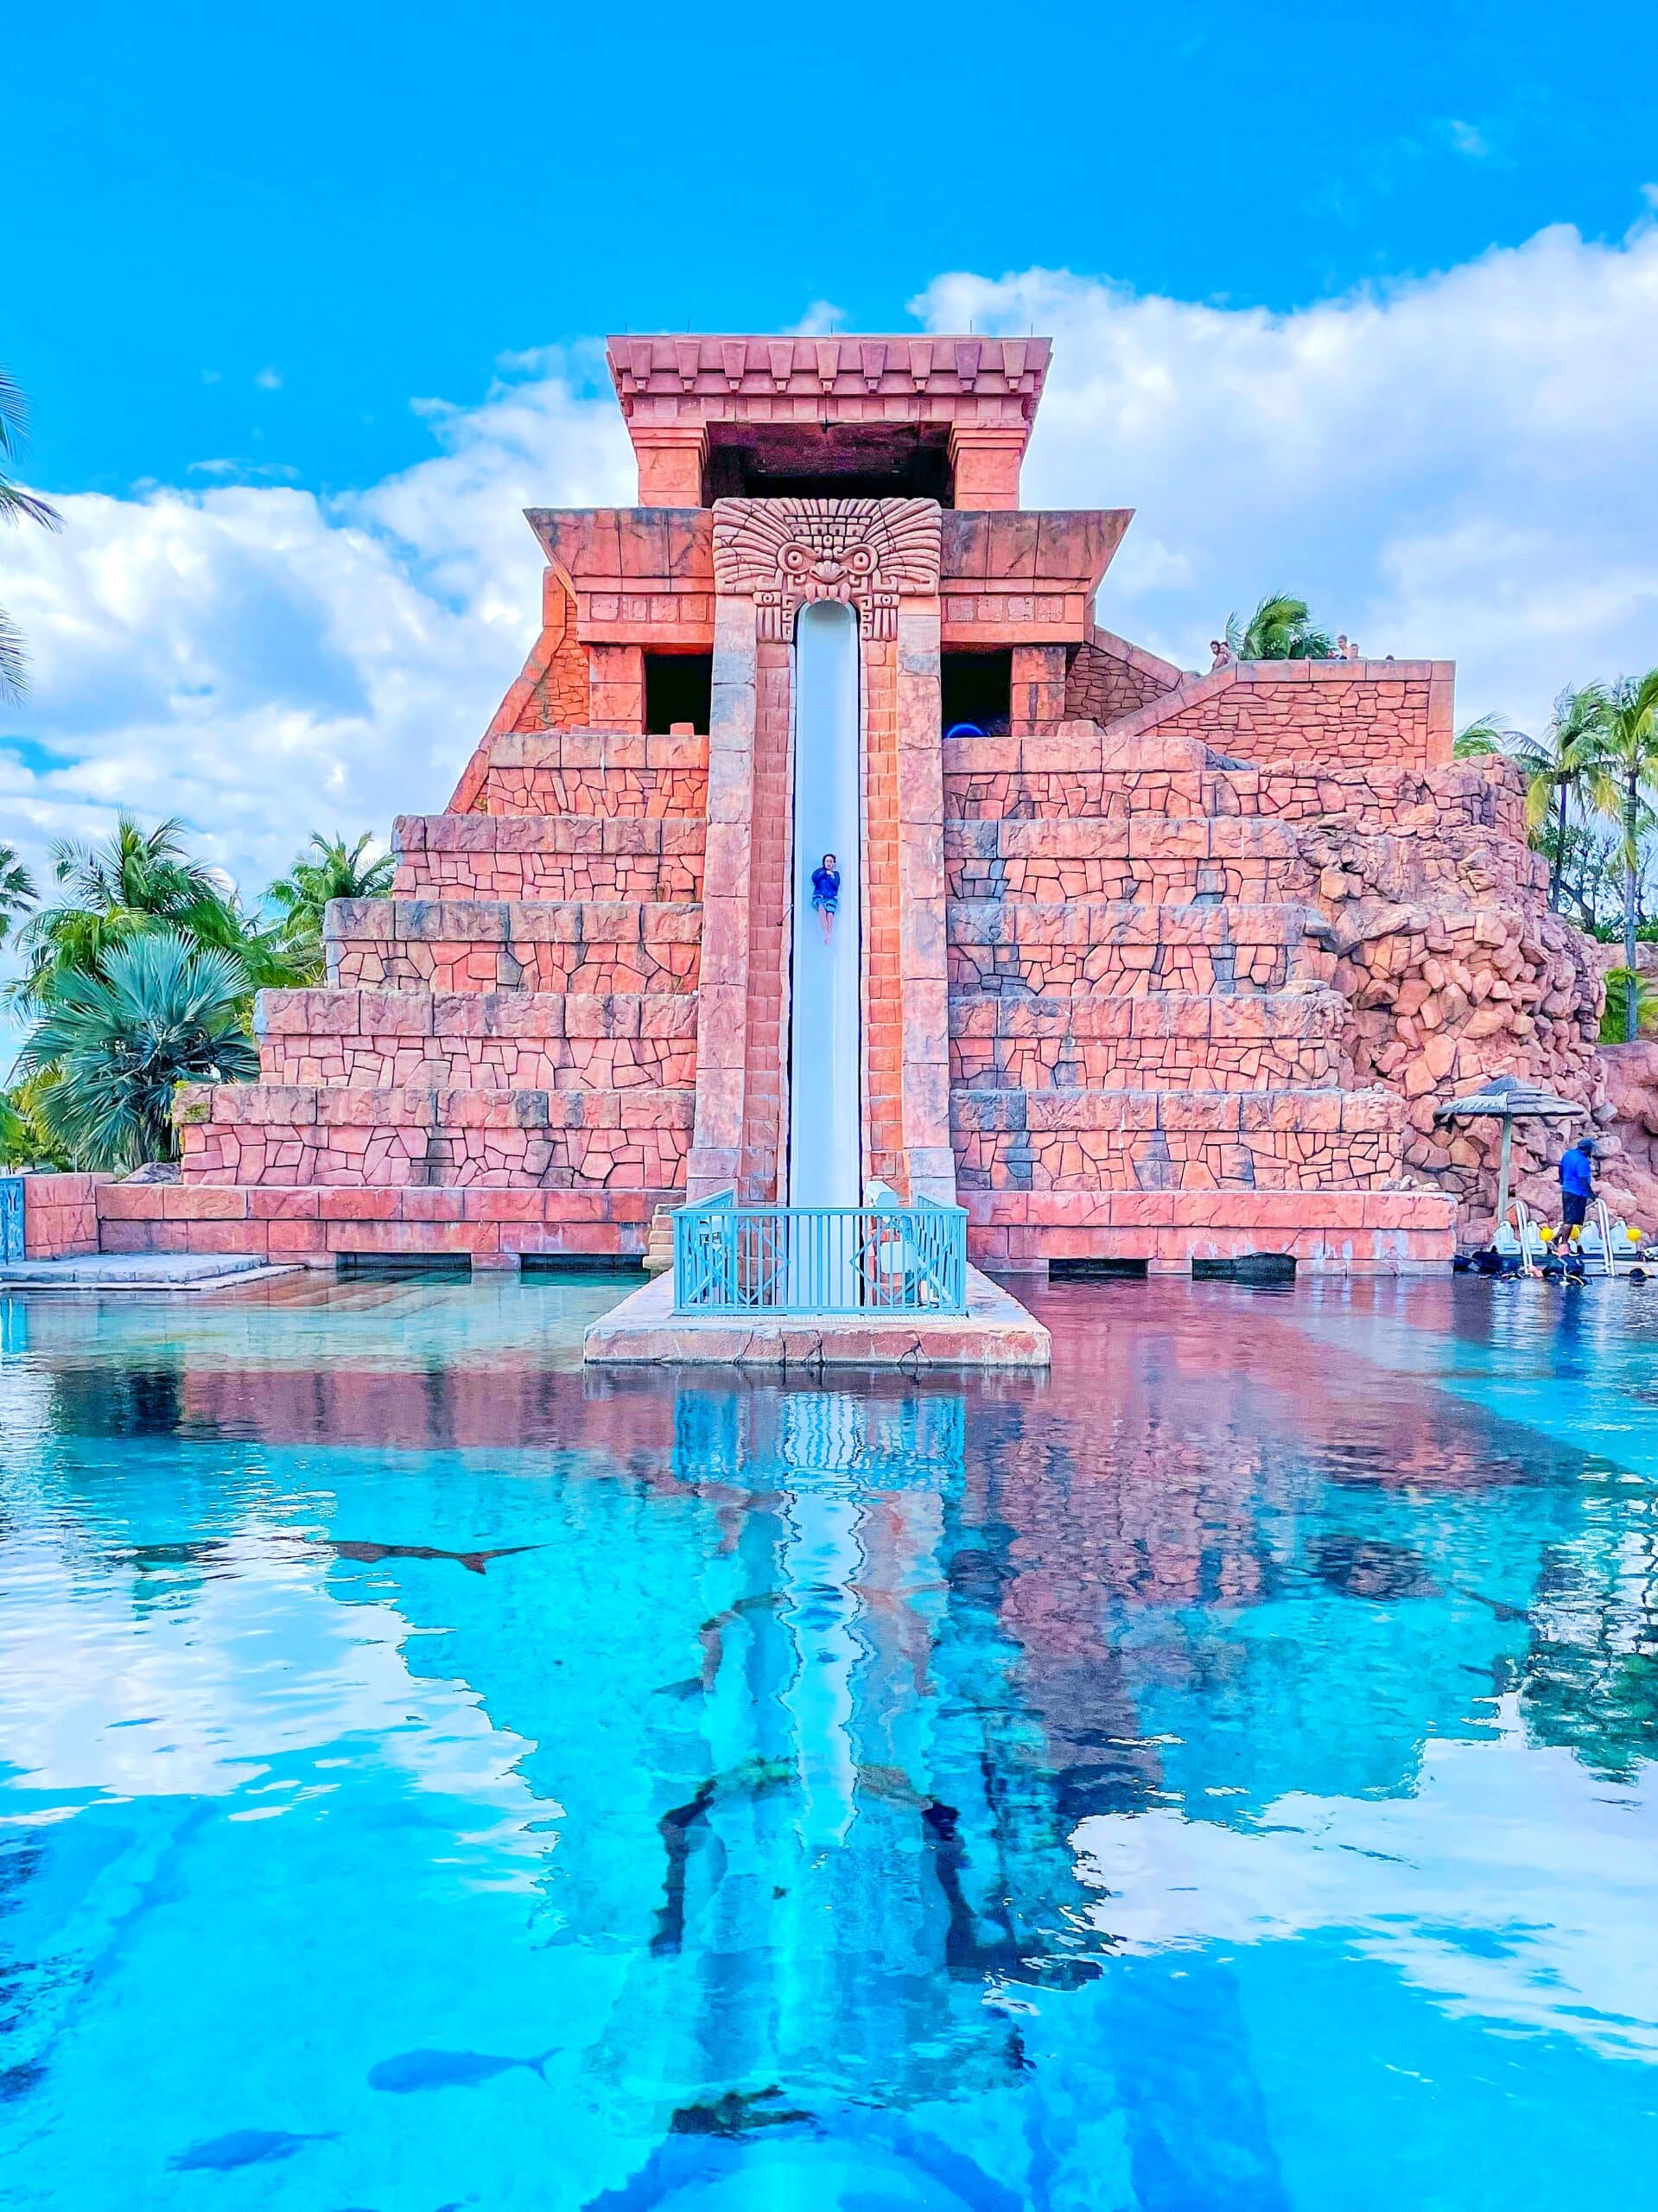 What to do at Atlantis Bahamas - Leap of Faith slide on the Mayan Temple